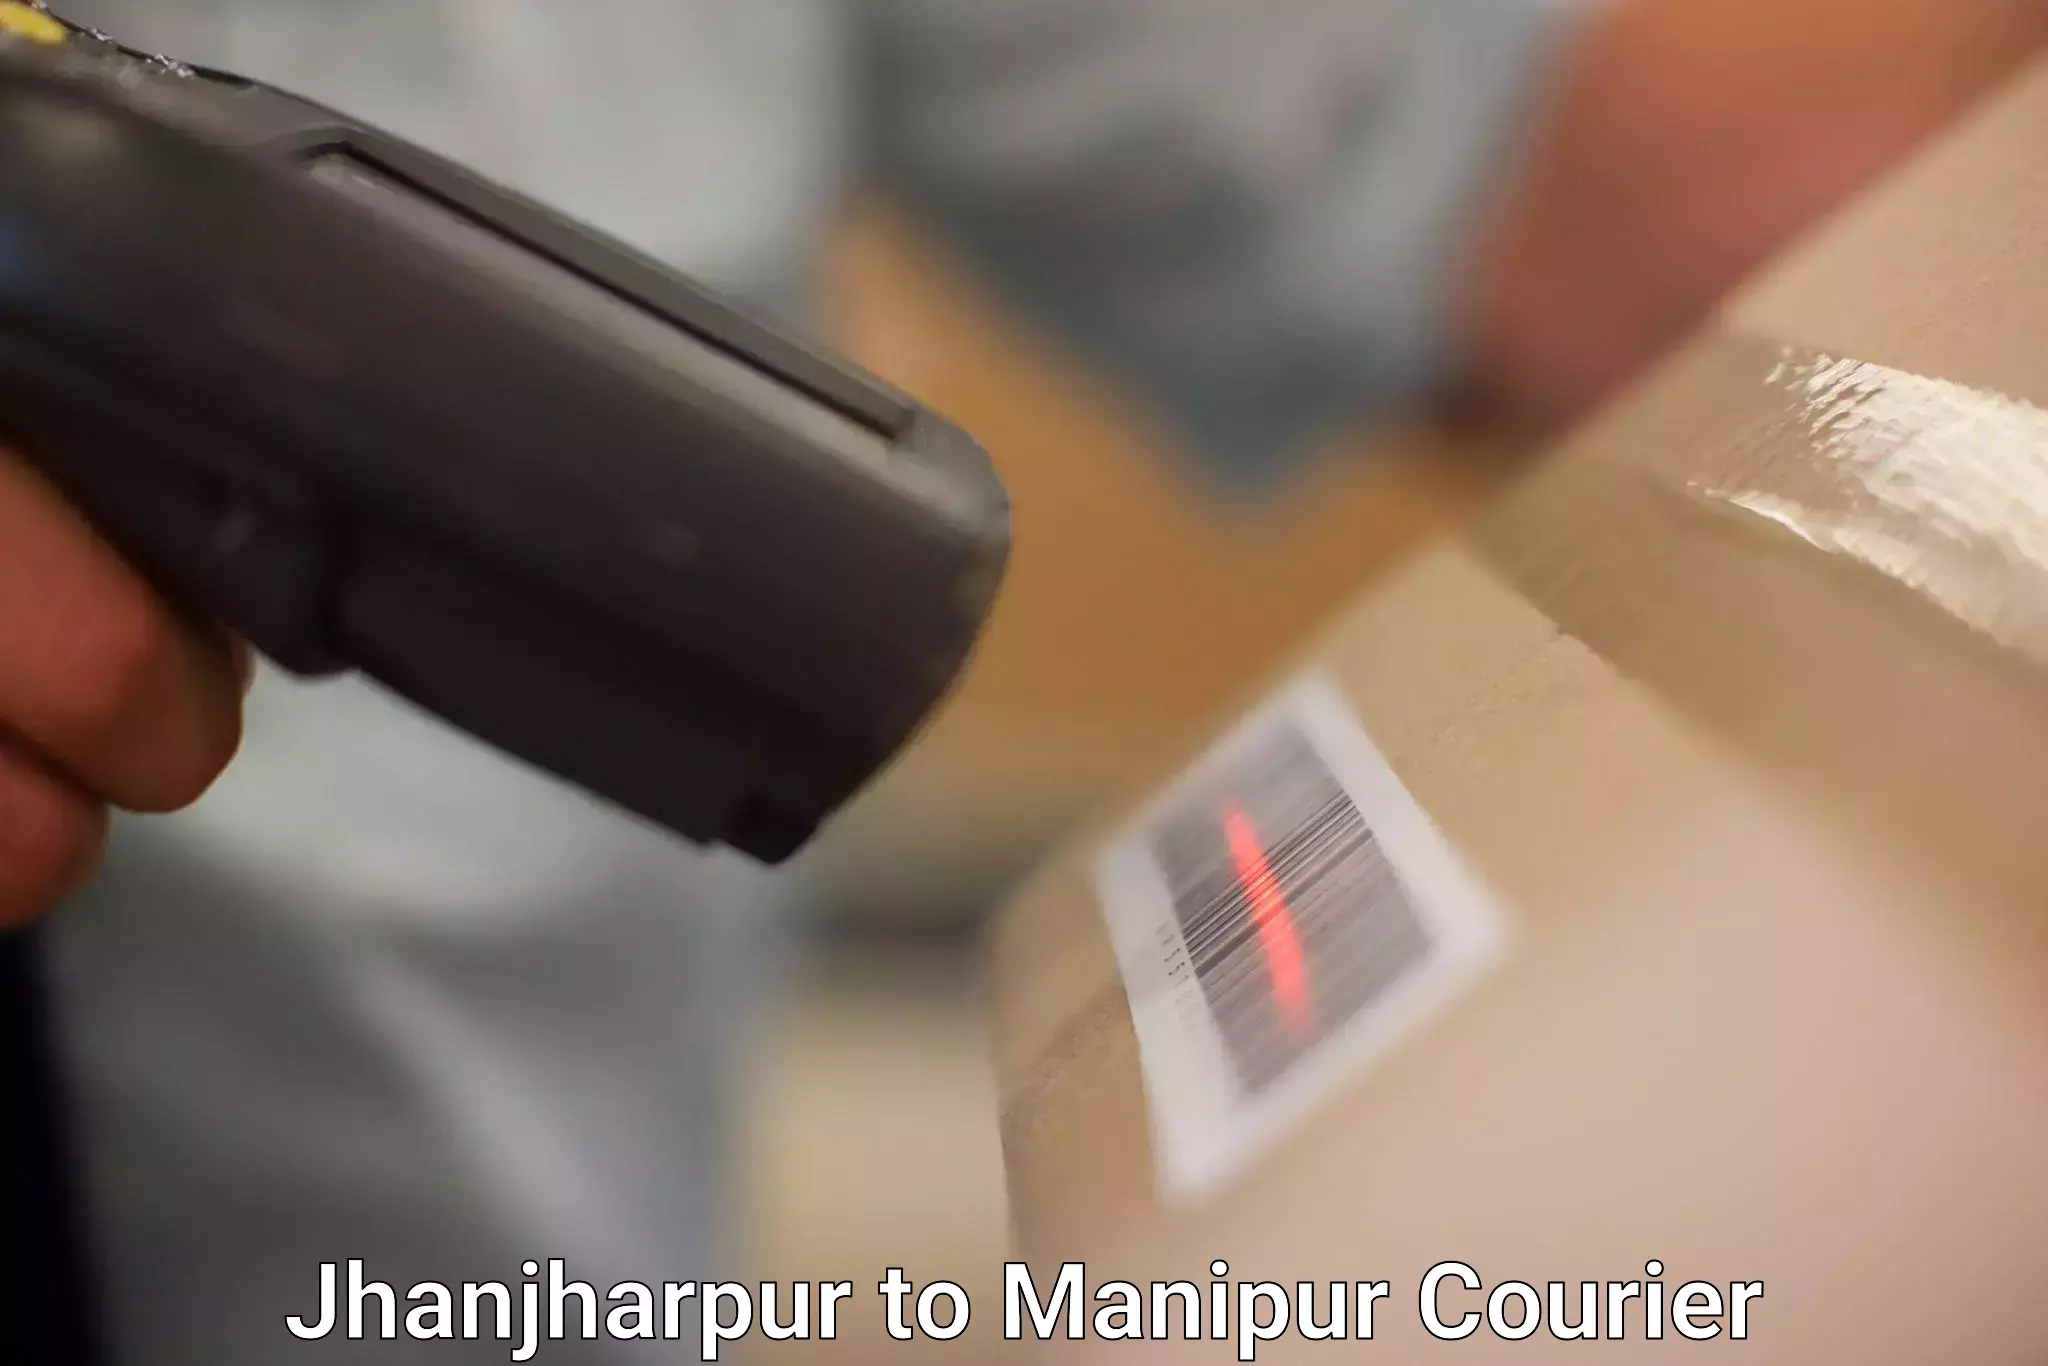 Package delivery network Jhanjharpur to Manipur